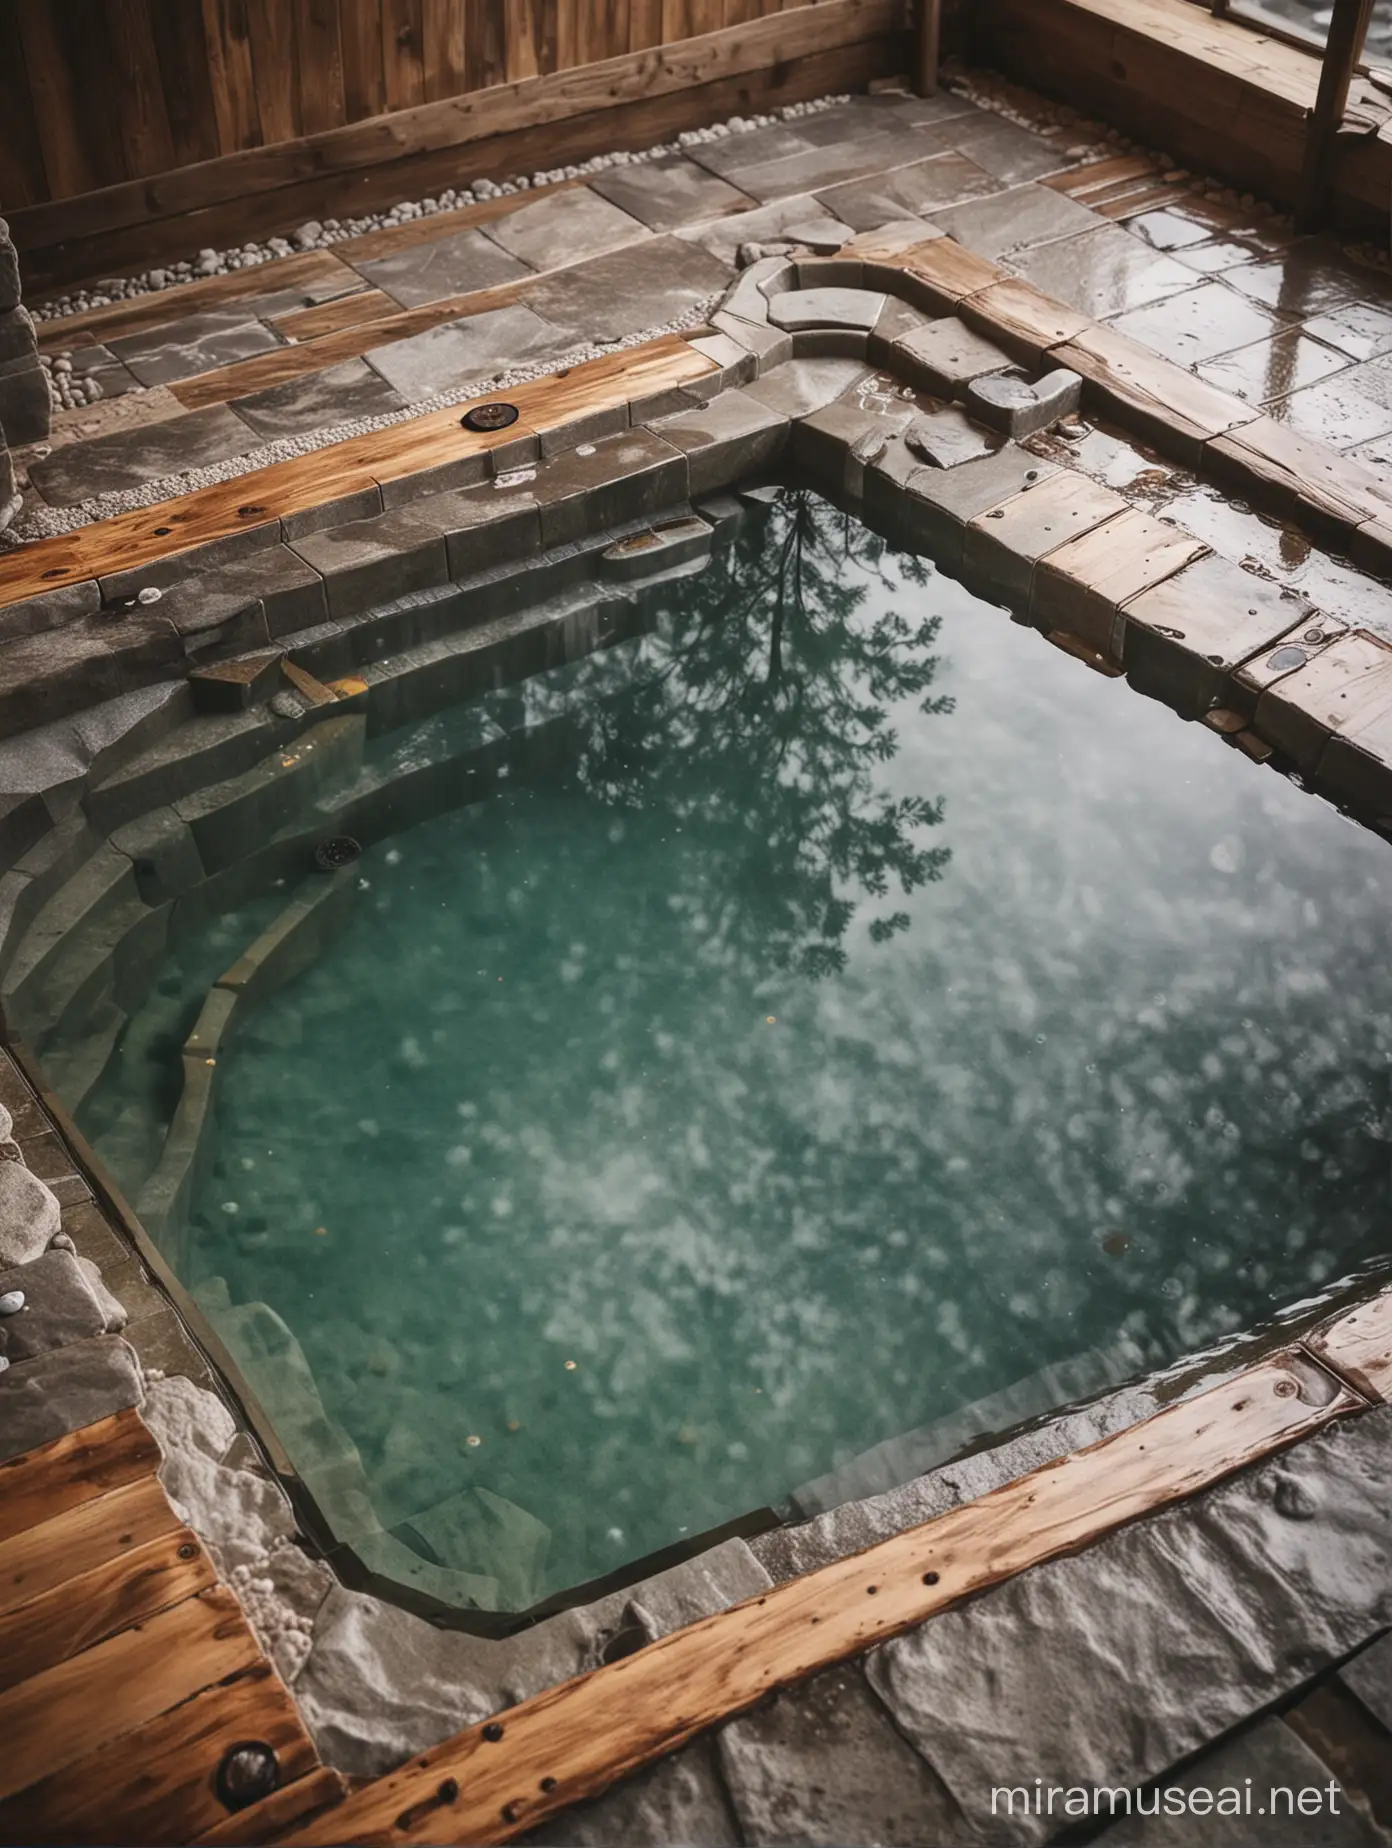 CloseUp HighQuality Indoor Hot Spring with Diagonal Composition